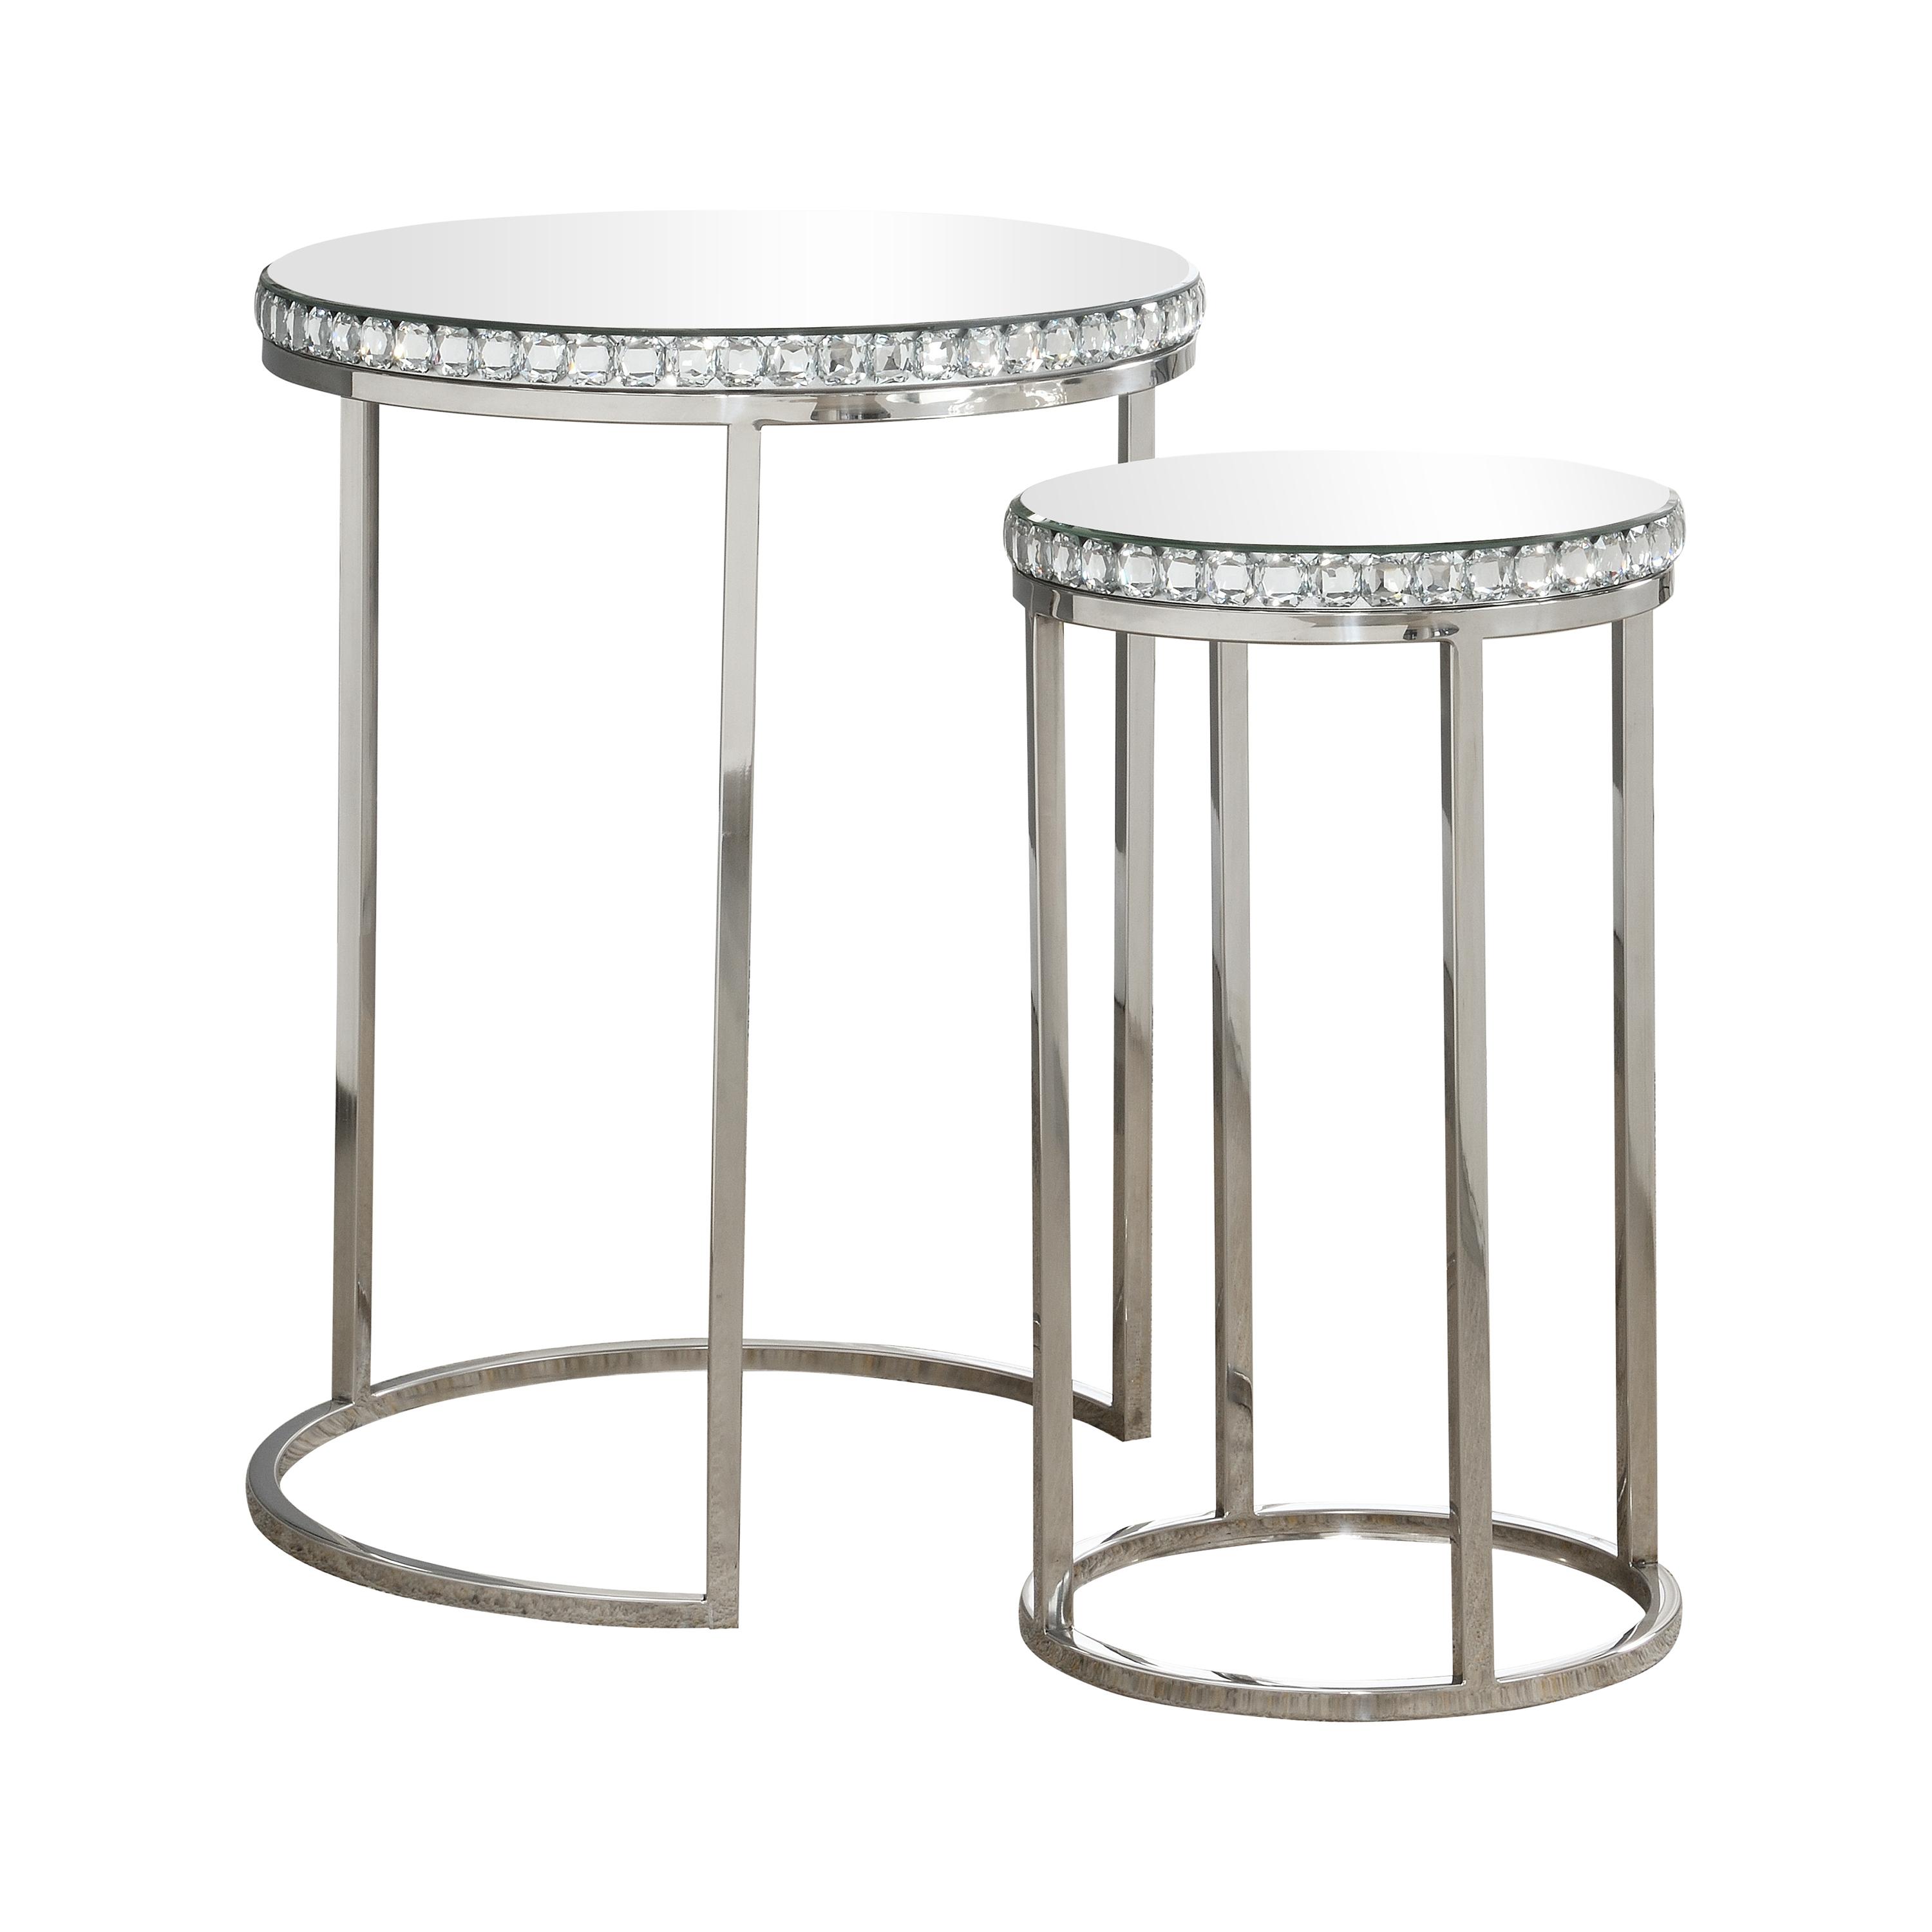 Contemporary Nesting Tables Set 930227 930227 in Silver 